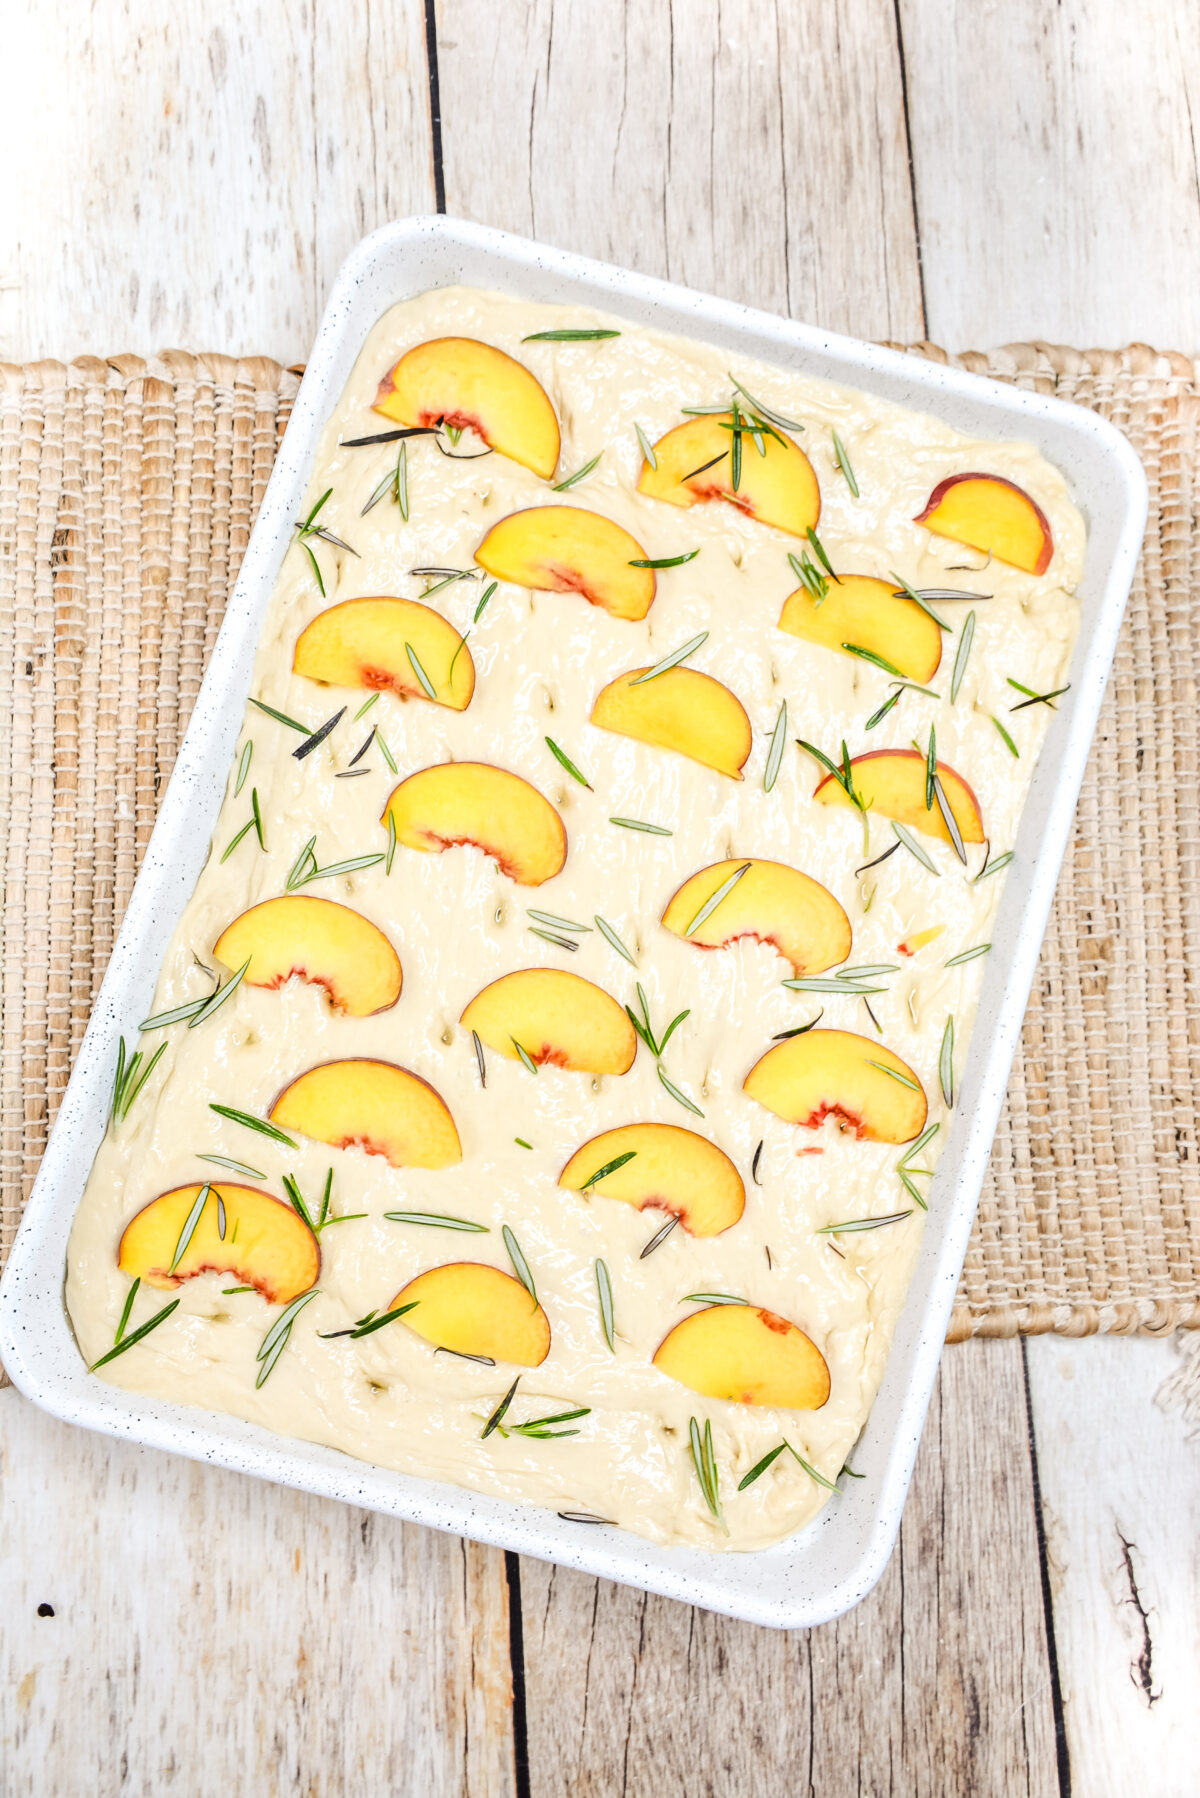 Peach slices and thyme arranged over the quarter sheet pan